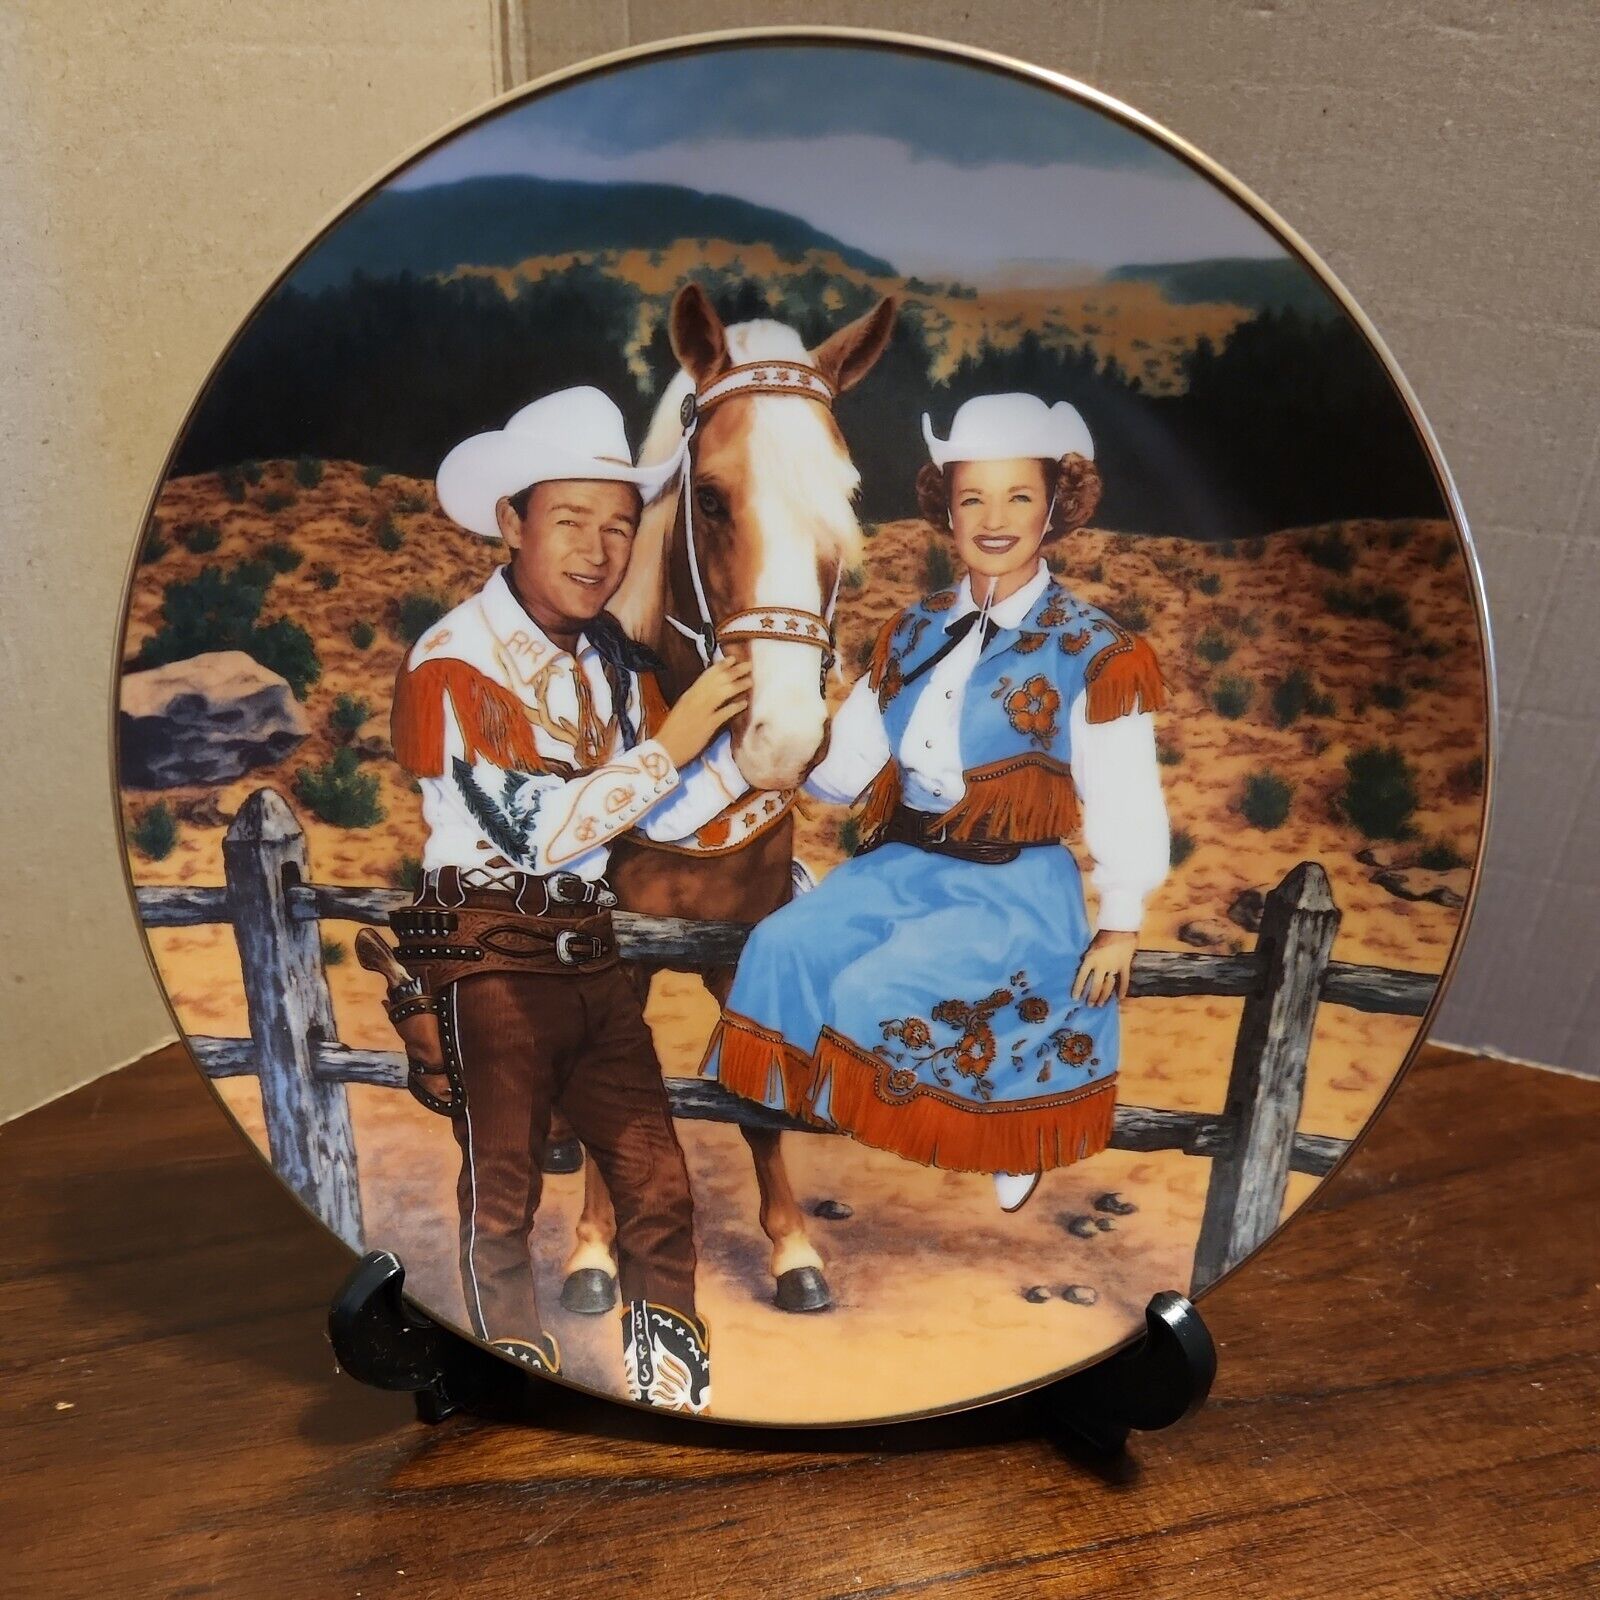 ROY ROGERS DALE EVANS TRIGGER CLASSIC TV WESTERNS COLLECTION PLATE #16248 1990